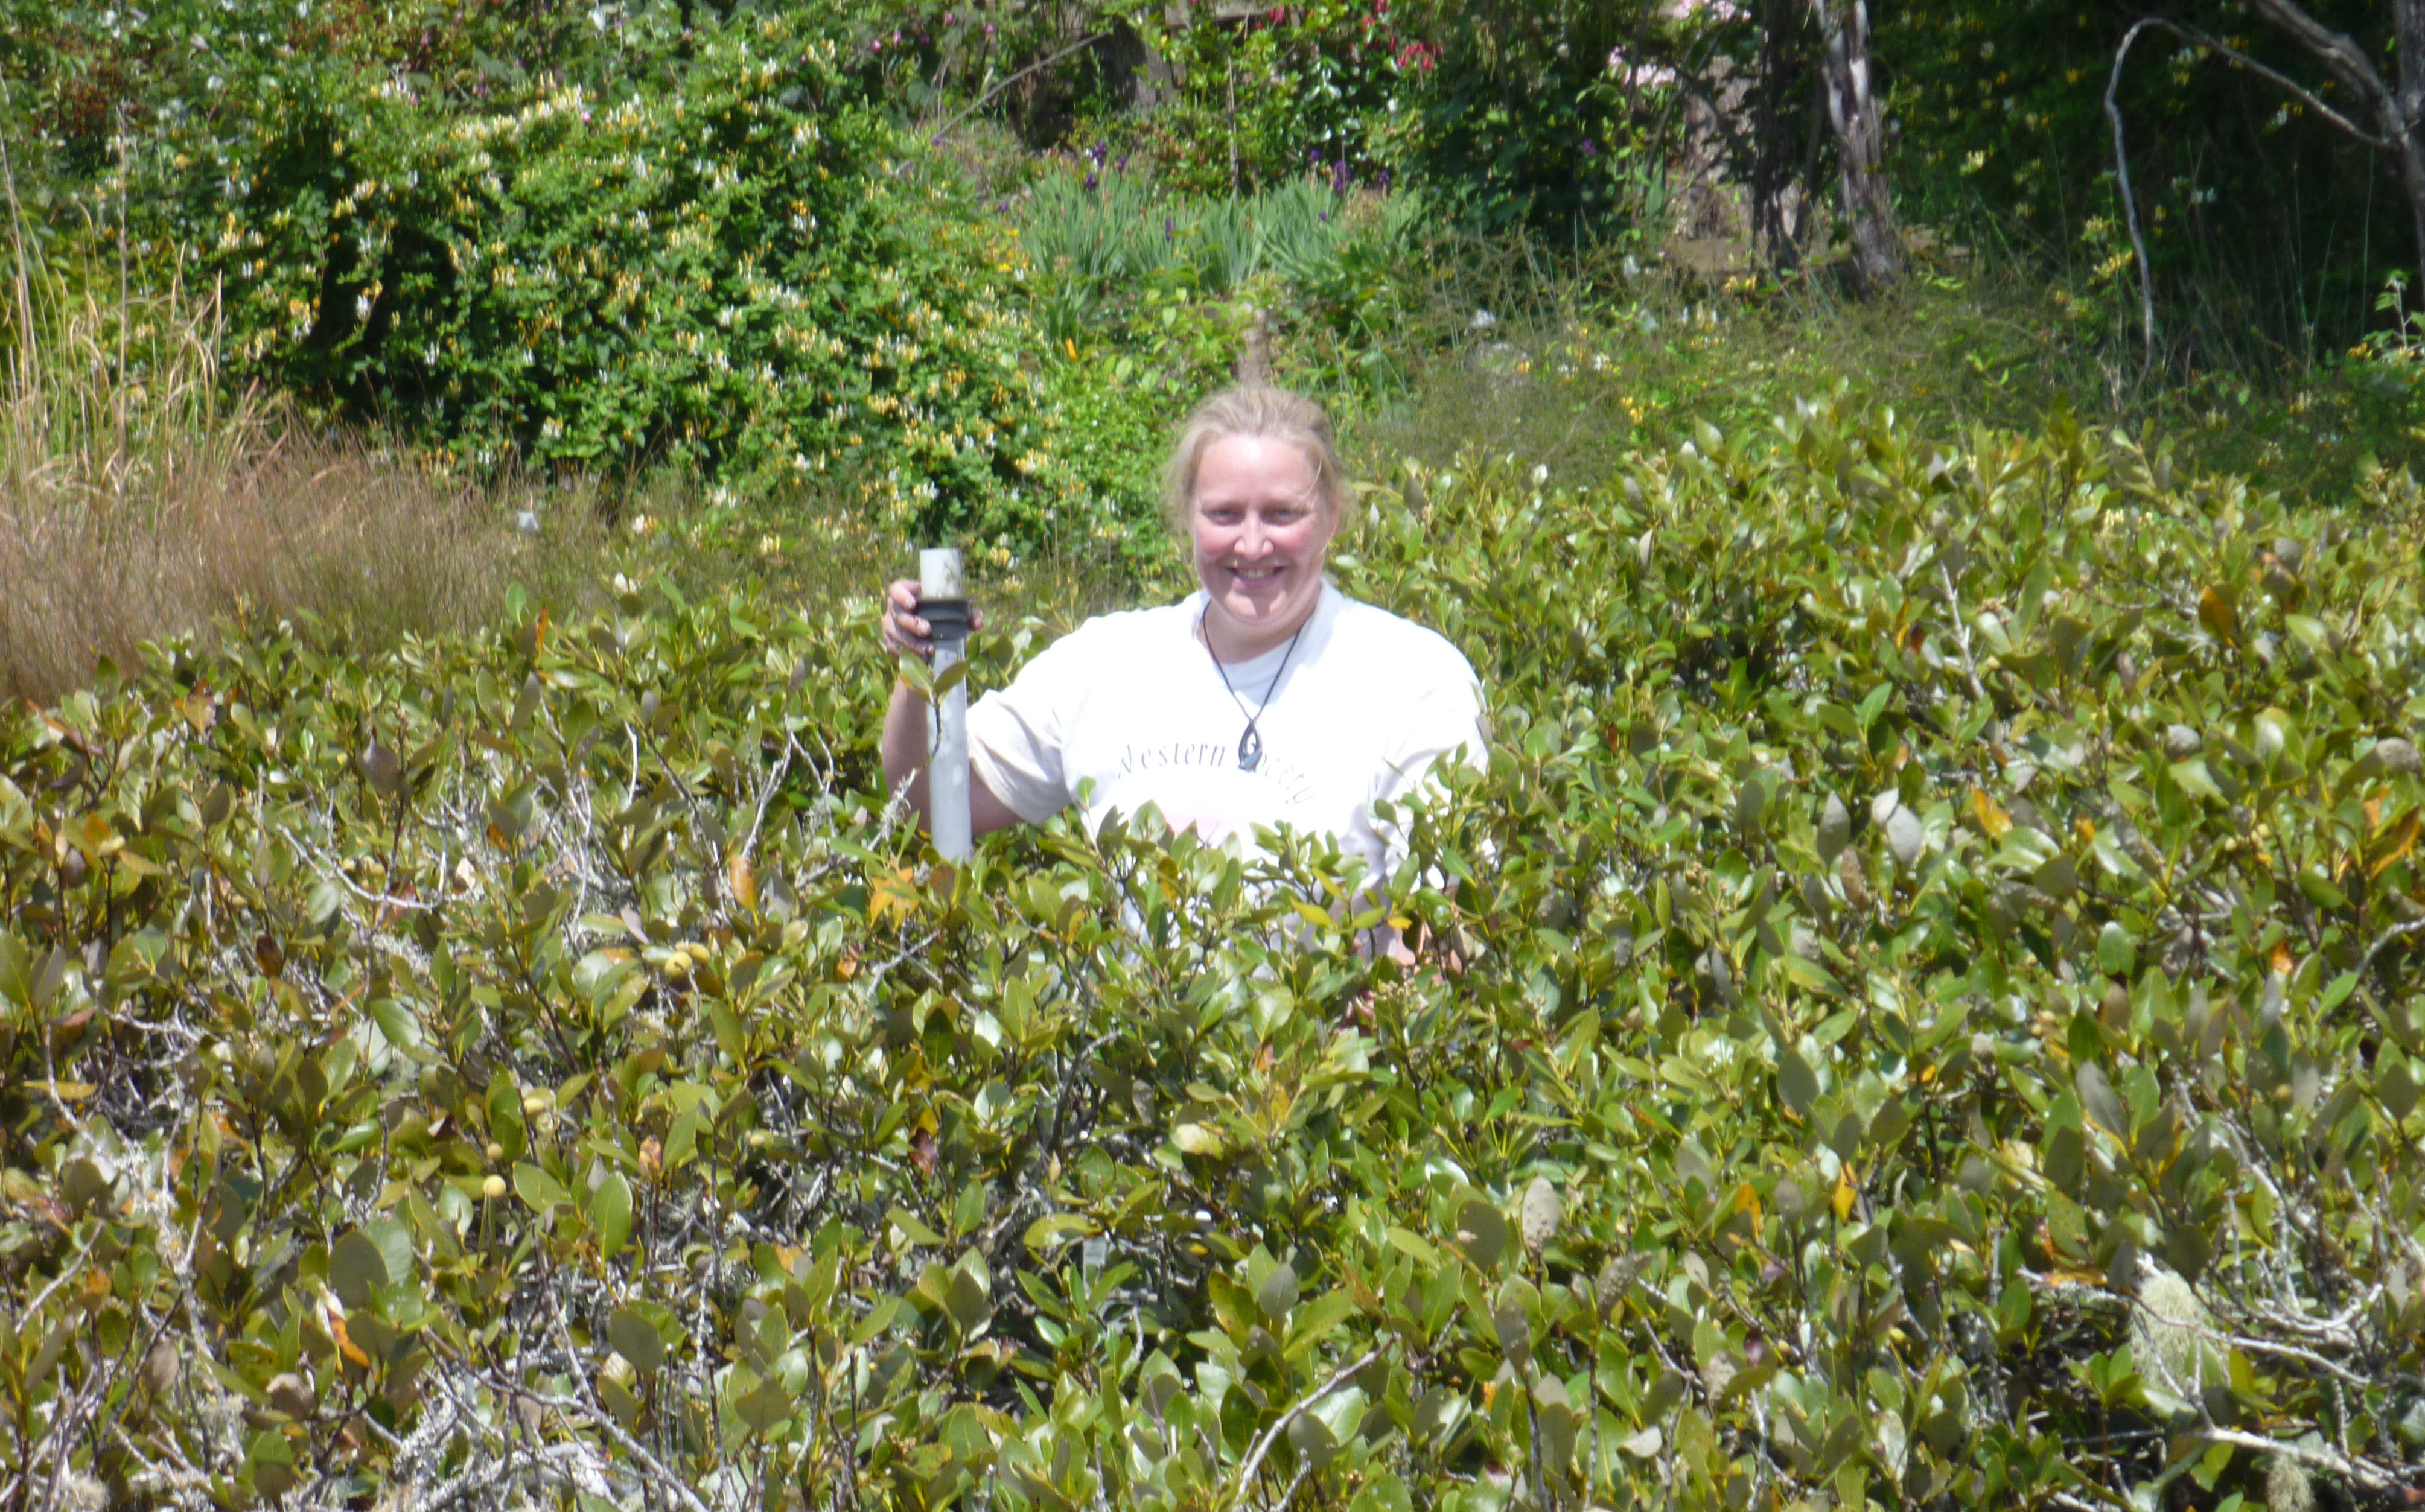 Associate Professor Carolyn Lundquist amongst some mangroves. You can see Carolyn's head & shoulders, otherwise it is just mangrove leaves and branches.